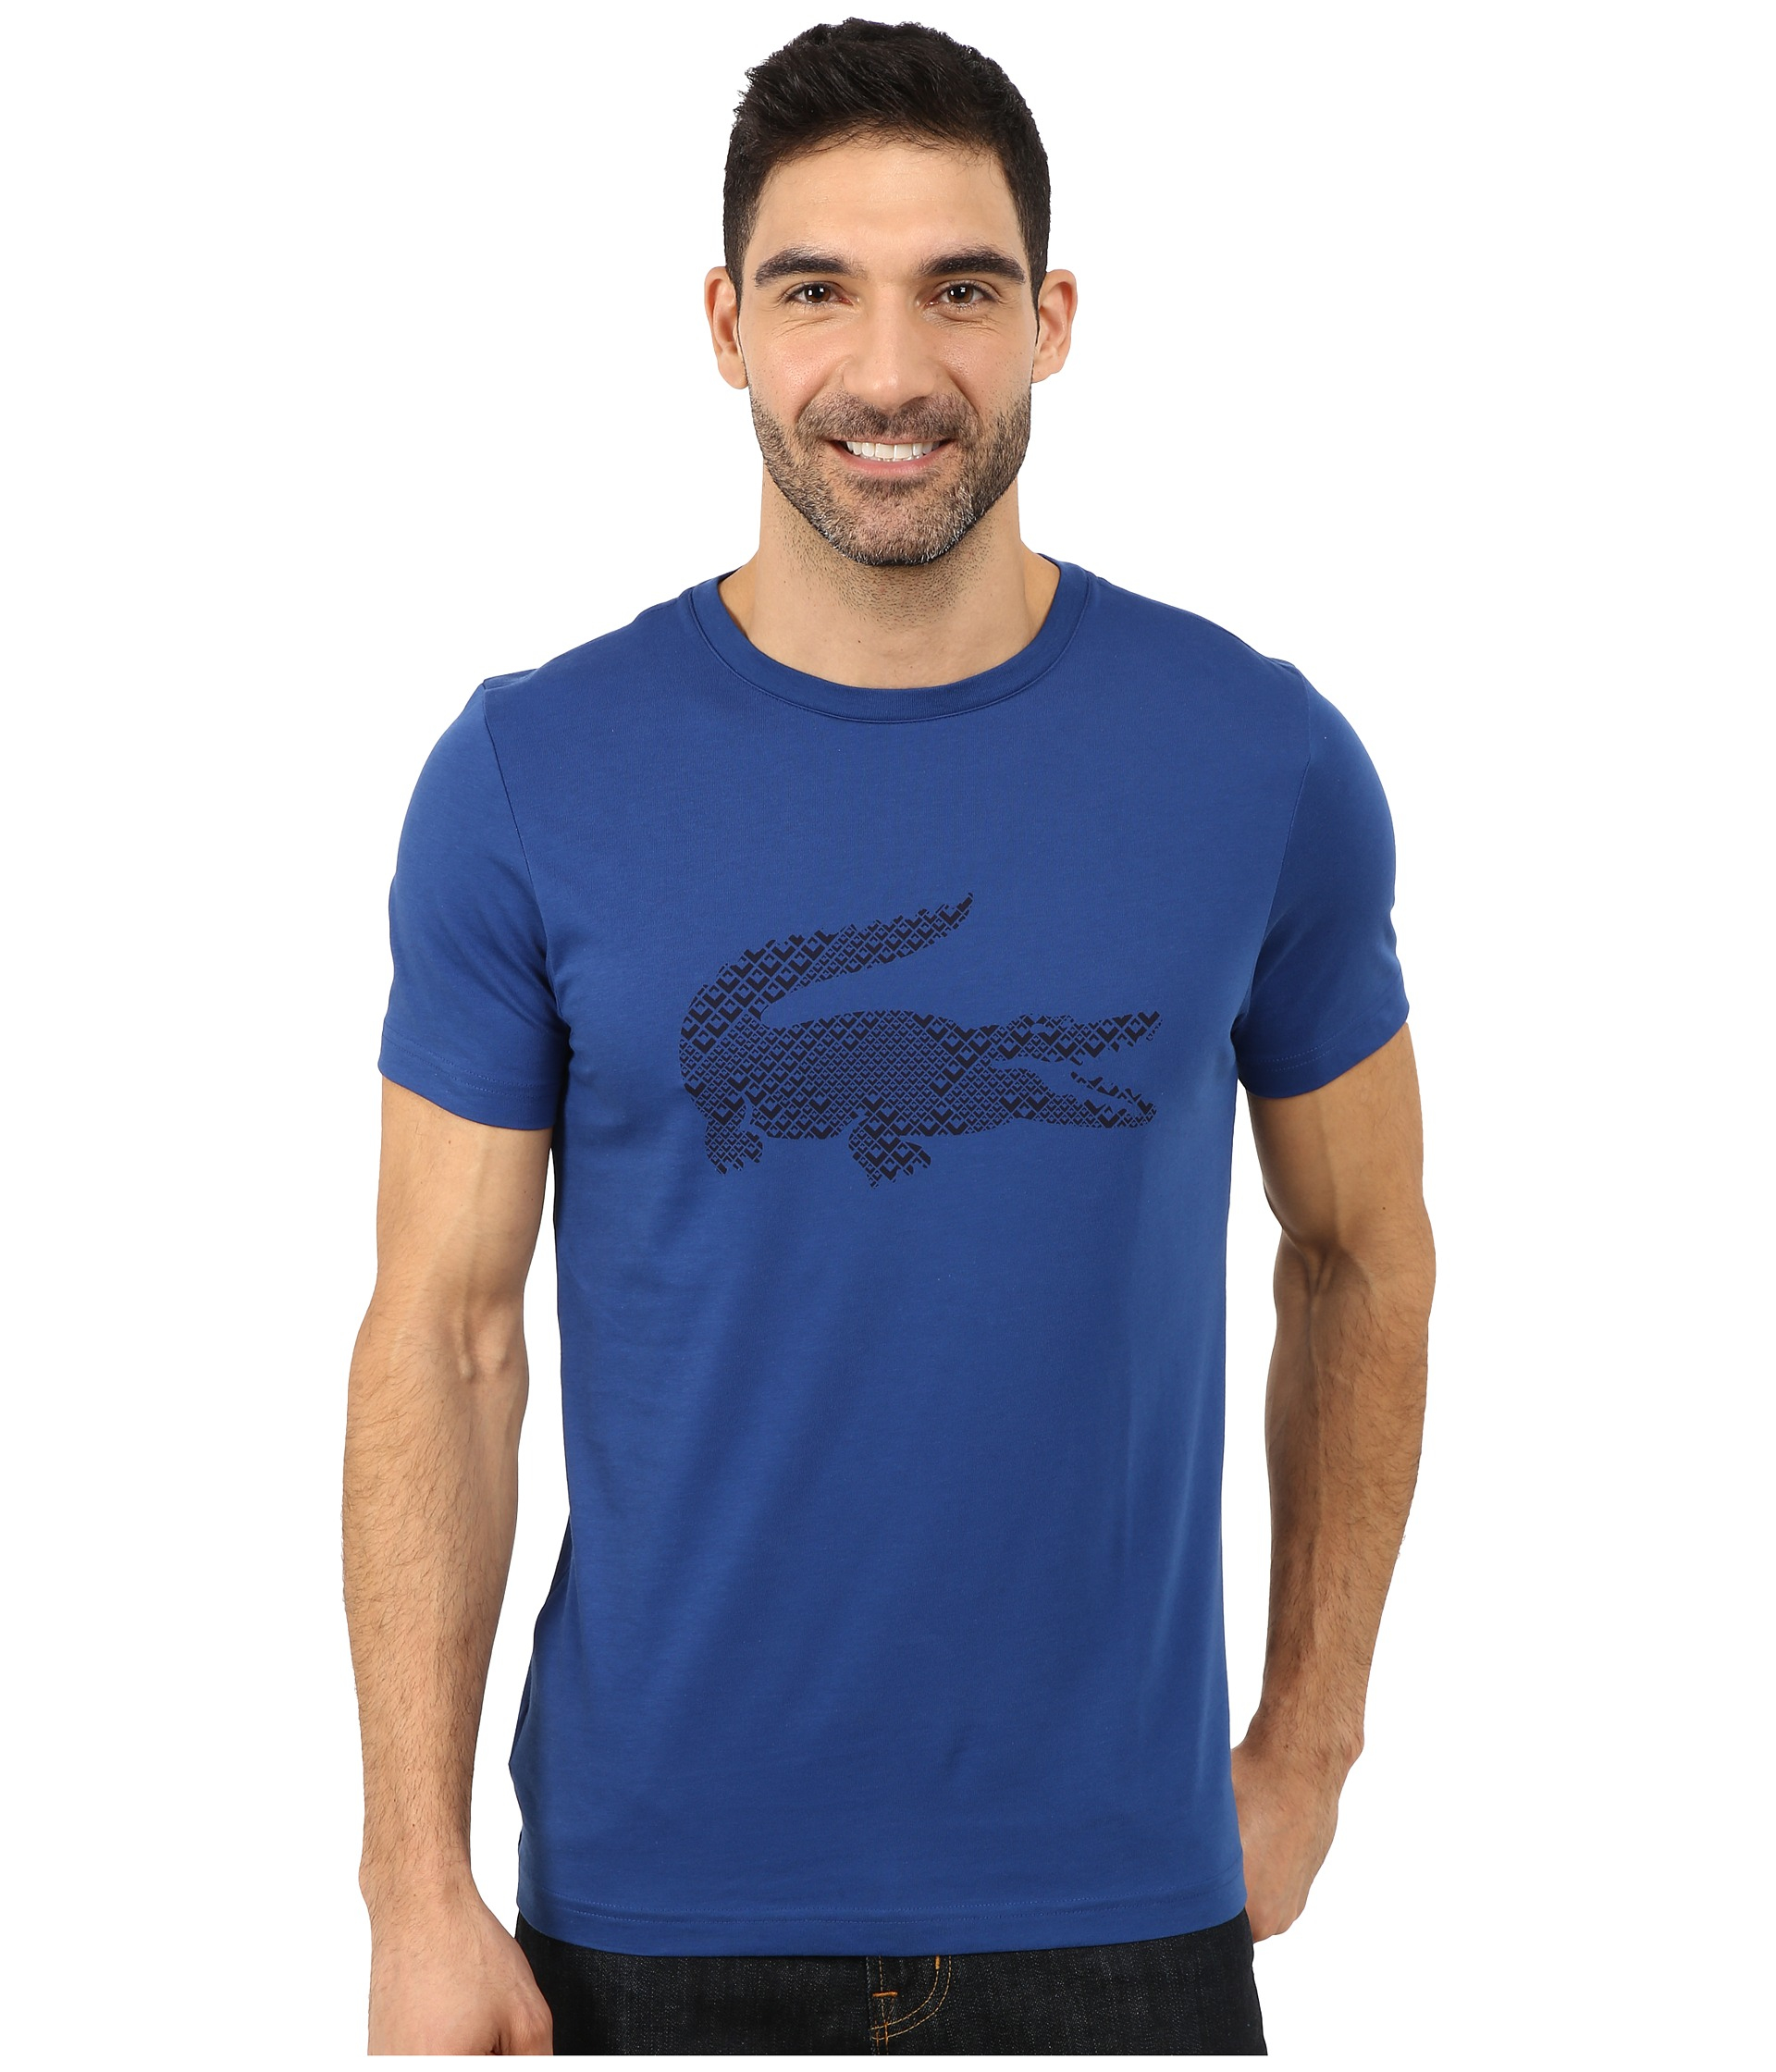 Lacoste Cotton Sport Short Sleeved Printed Croc Graphic Tee Shirt in Blue  for Men - Lyst